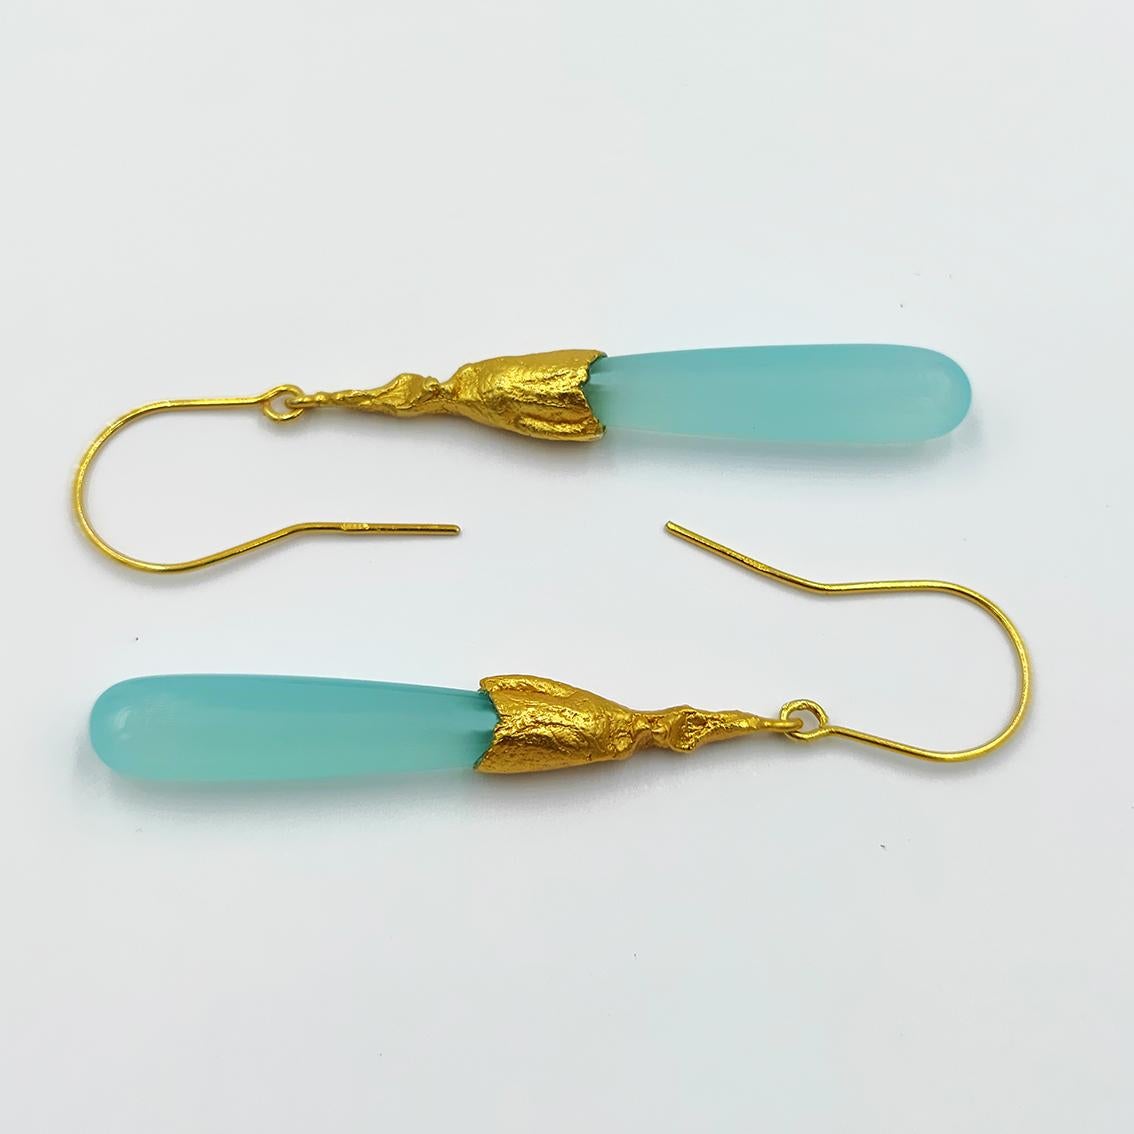 Blue Agate Silver Gold Plate Hand Made Artist Design Dangle Earrings
Earrings from RASTRO collection.
Rastro is a TRACE in Spanish. Fingerprint, human trace. The Creator's Trail.
the base of the earring is as if molded, carved from metal,